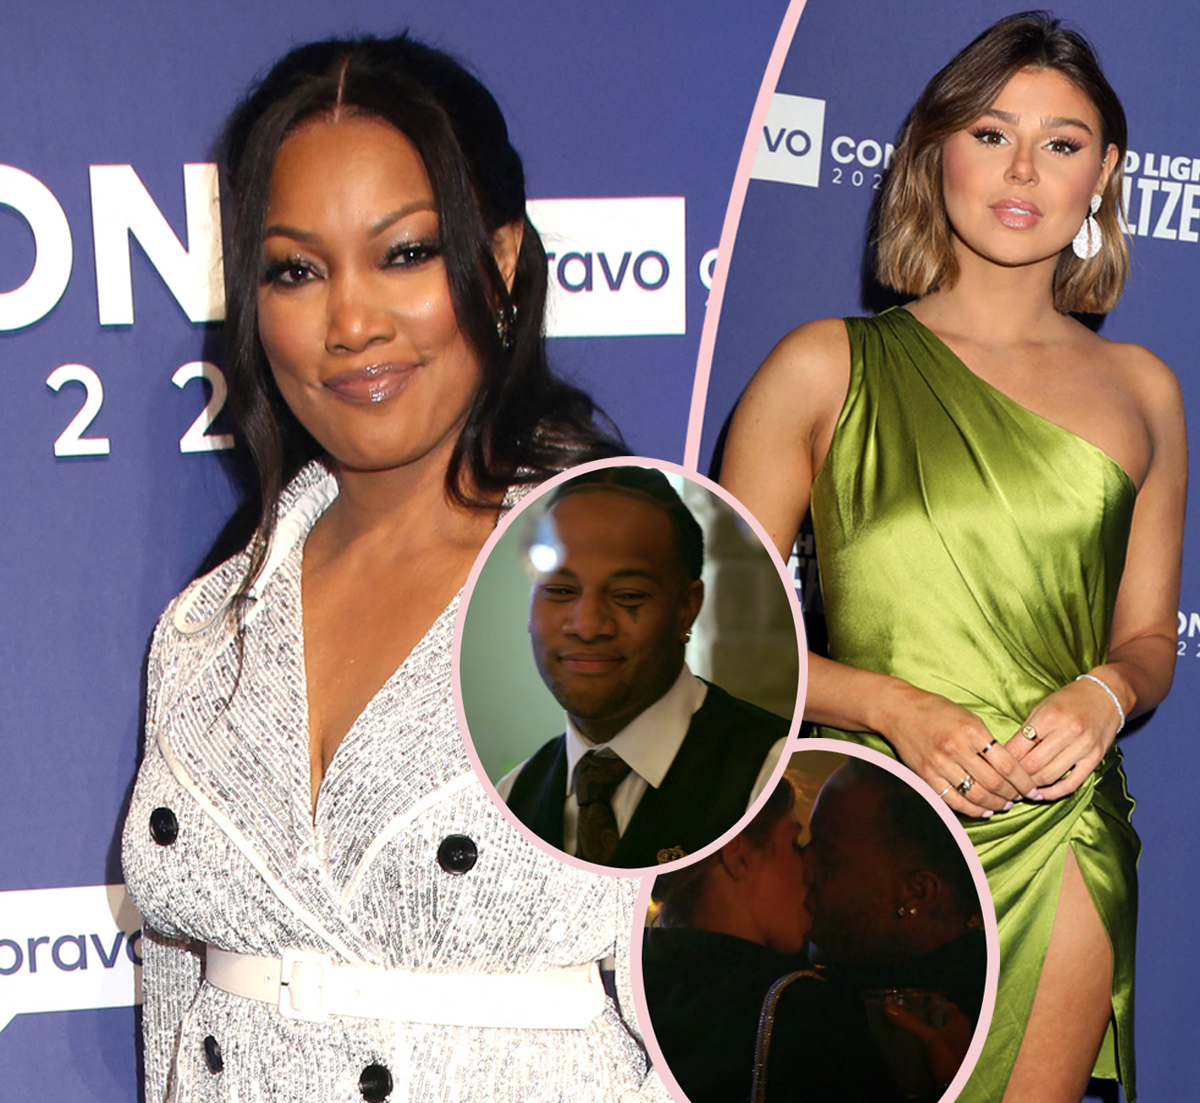 Garcelle Beauvais’ son’s estranged wife Oliver claims they were together during Raquel Leviss Makeout! – Perez Hilton